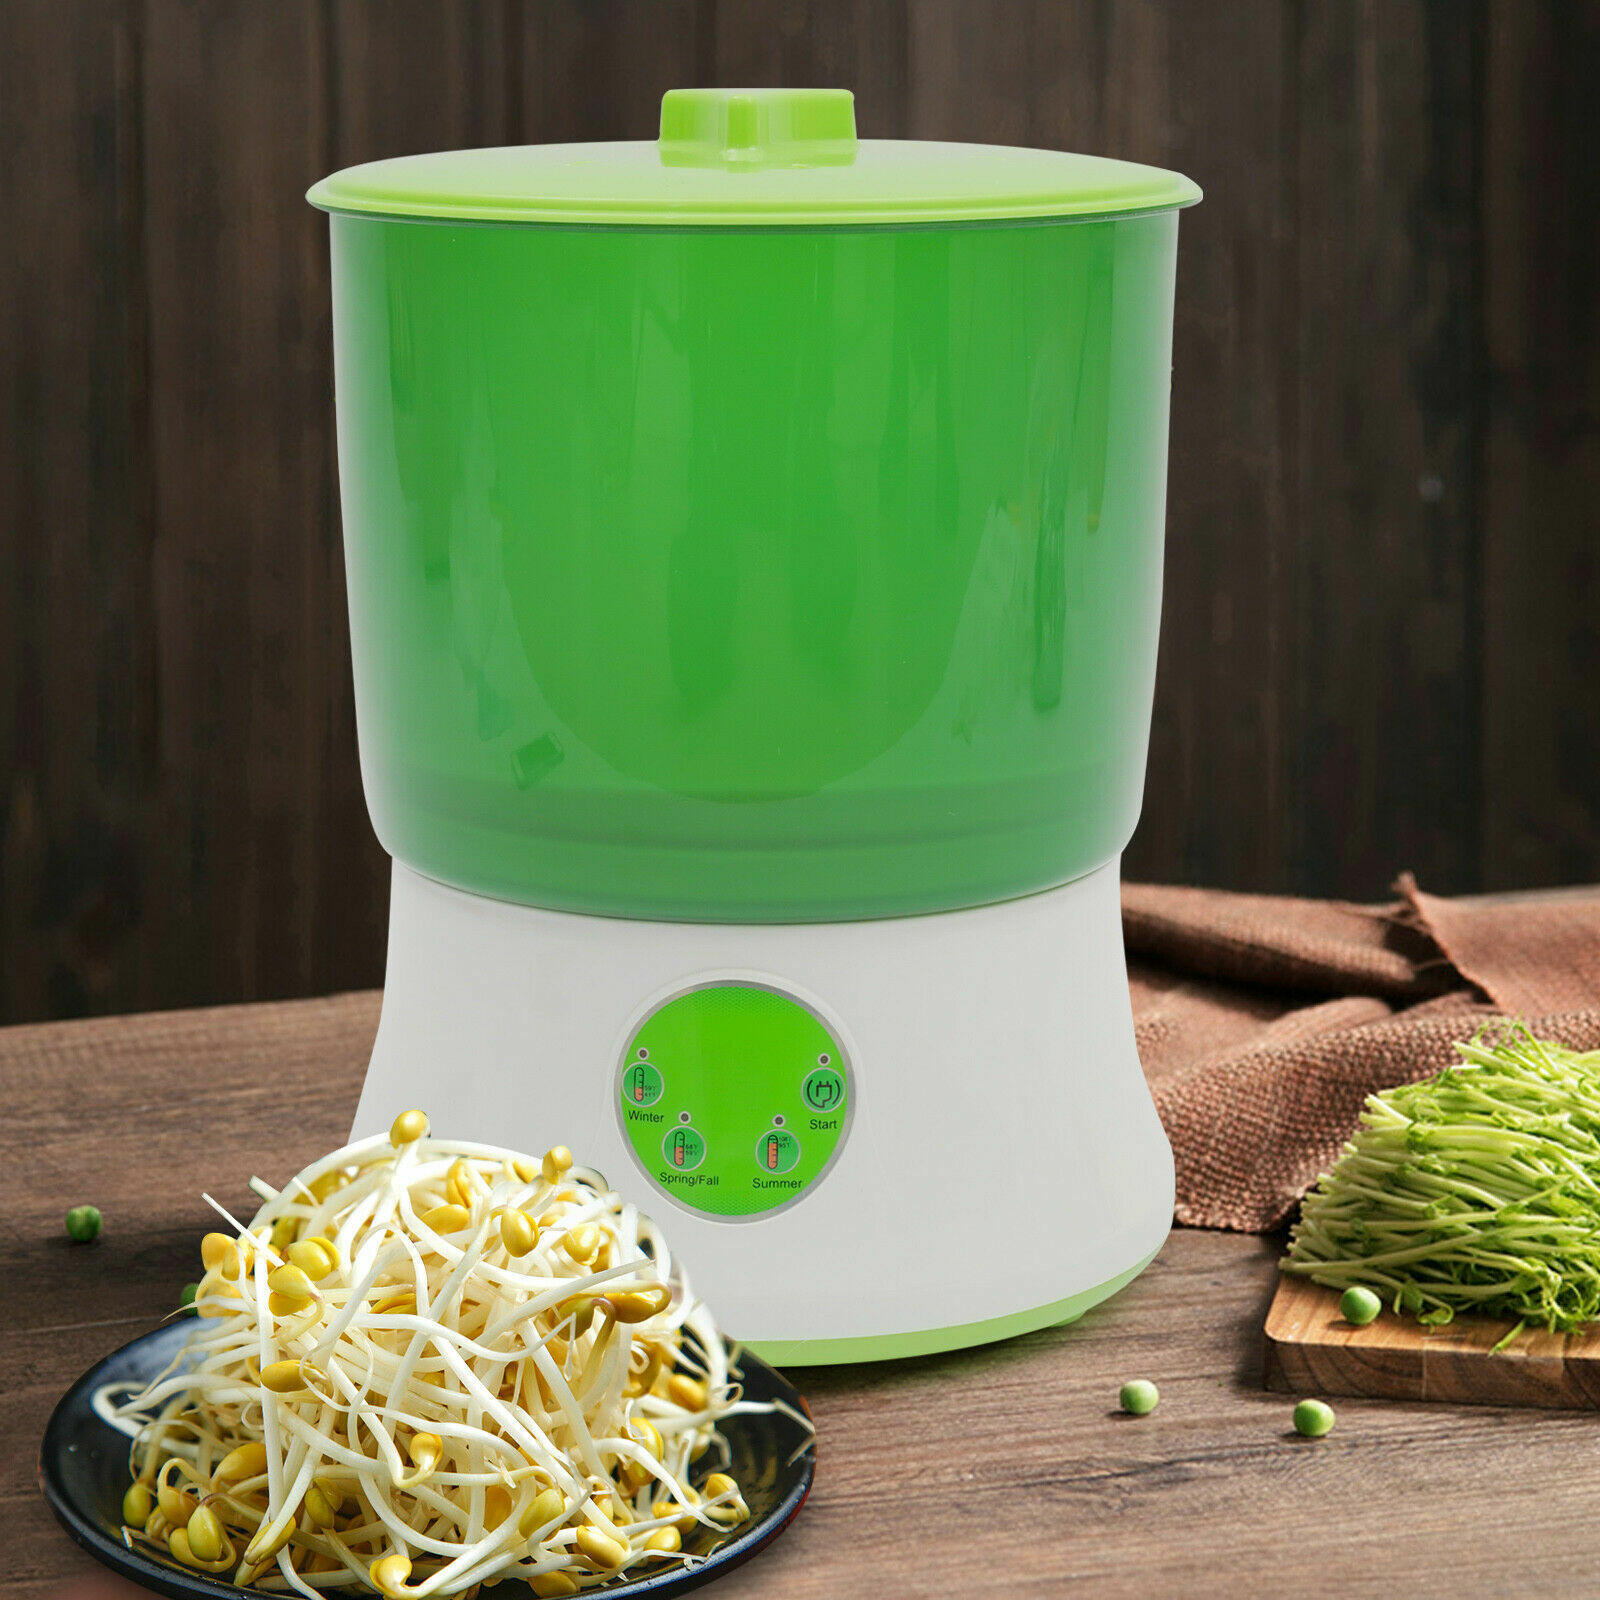 Automatic Bean Sprouts Machine Thermostat 2Layer Bean Sprouter Seed Sprout Maker